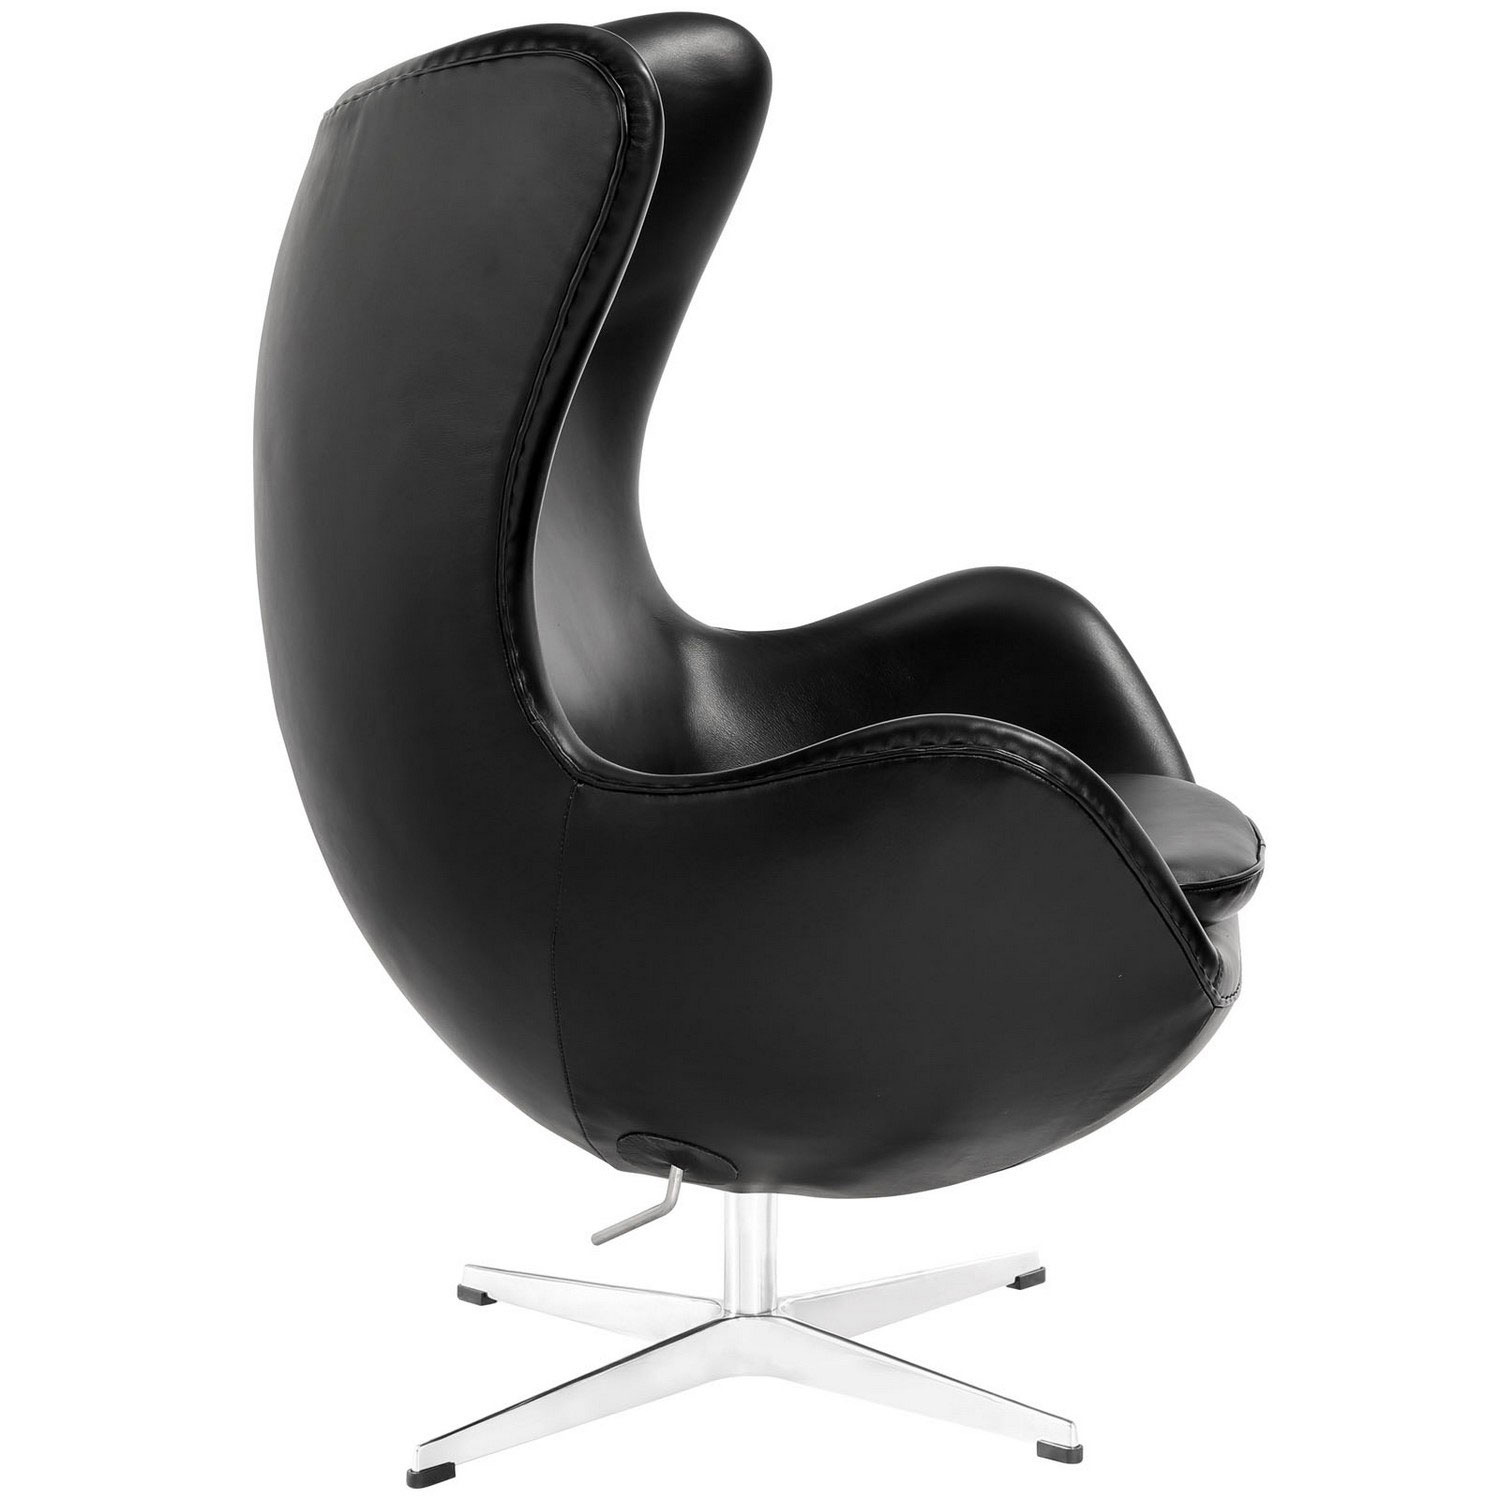 Modway Glove Leather Lounge Chair - Black